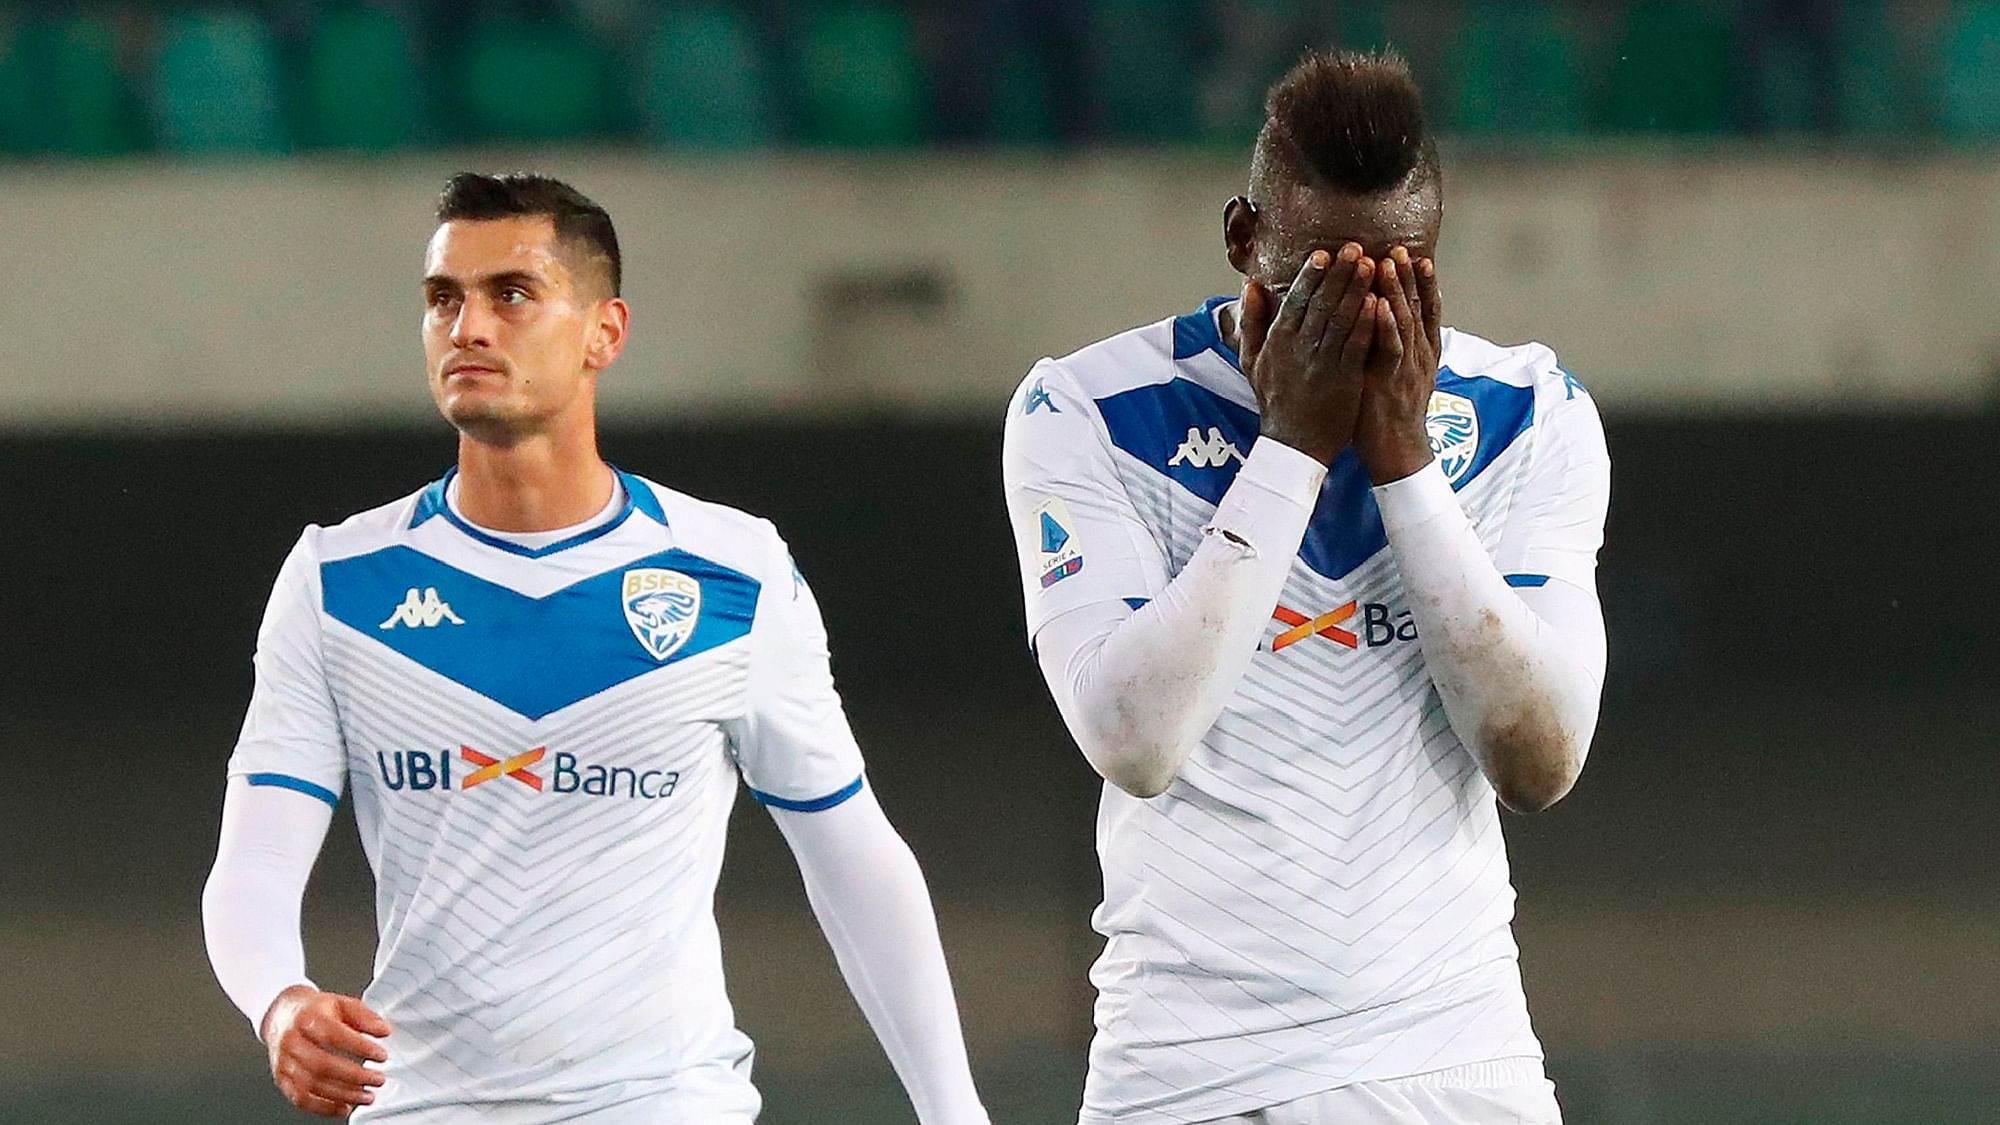 Brescia’s Mario Balotelli reacts at the end of the Serie A match between Verona and Brescia. The game ended 2-1 in Verona’s favour.